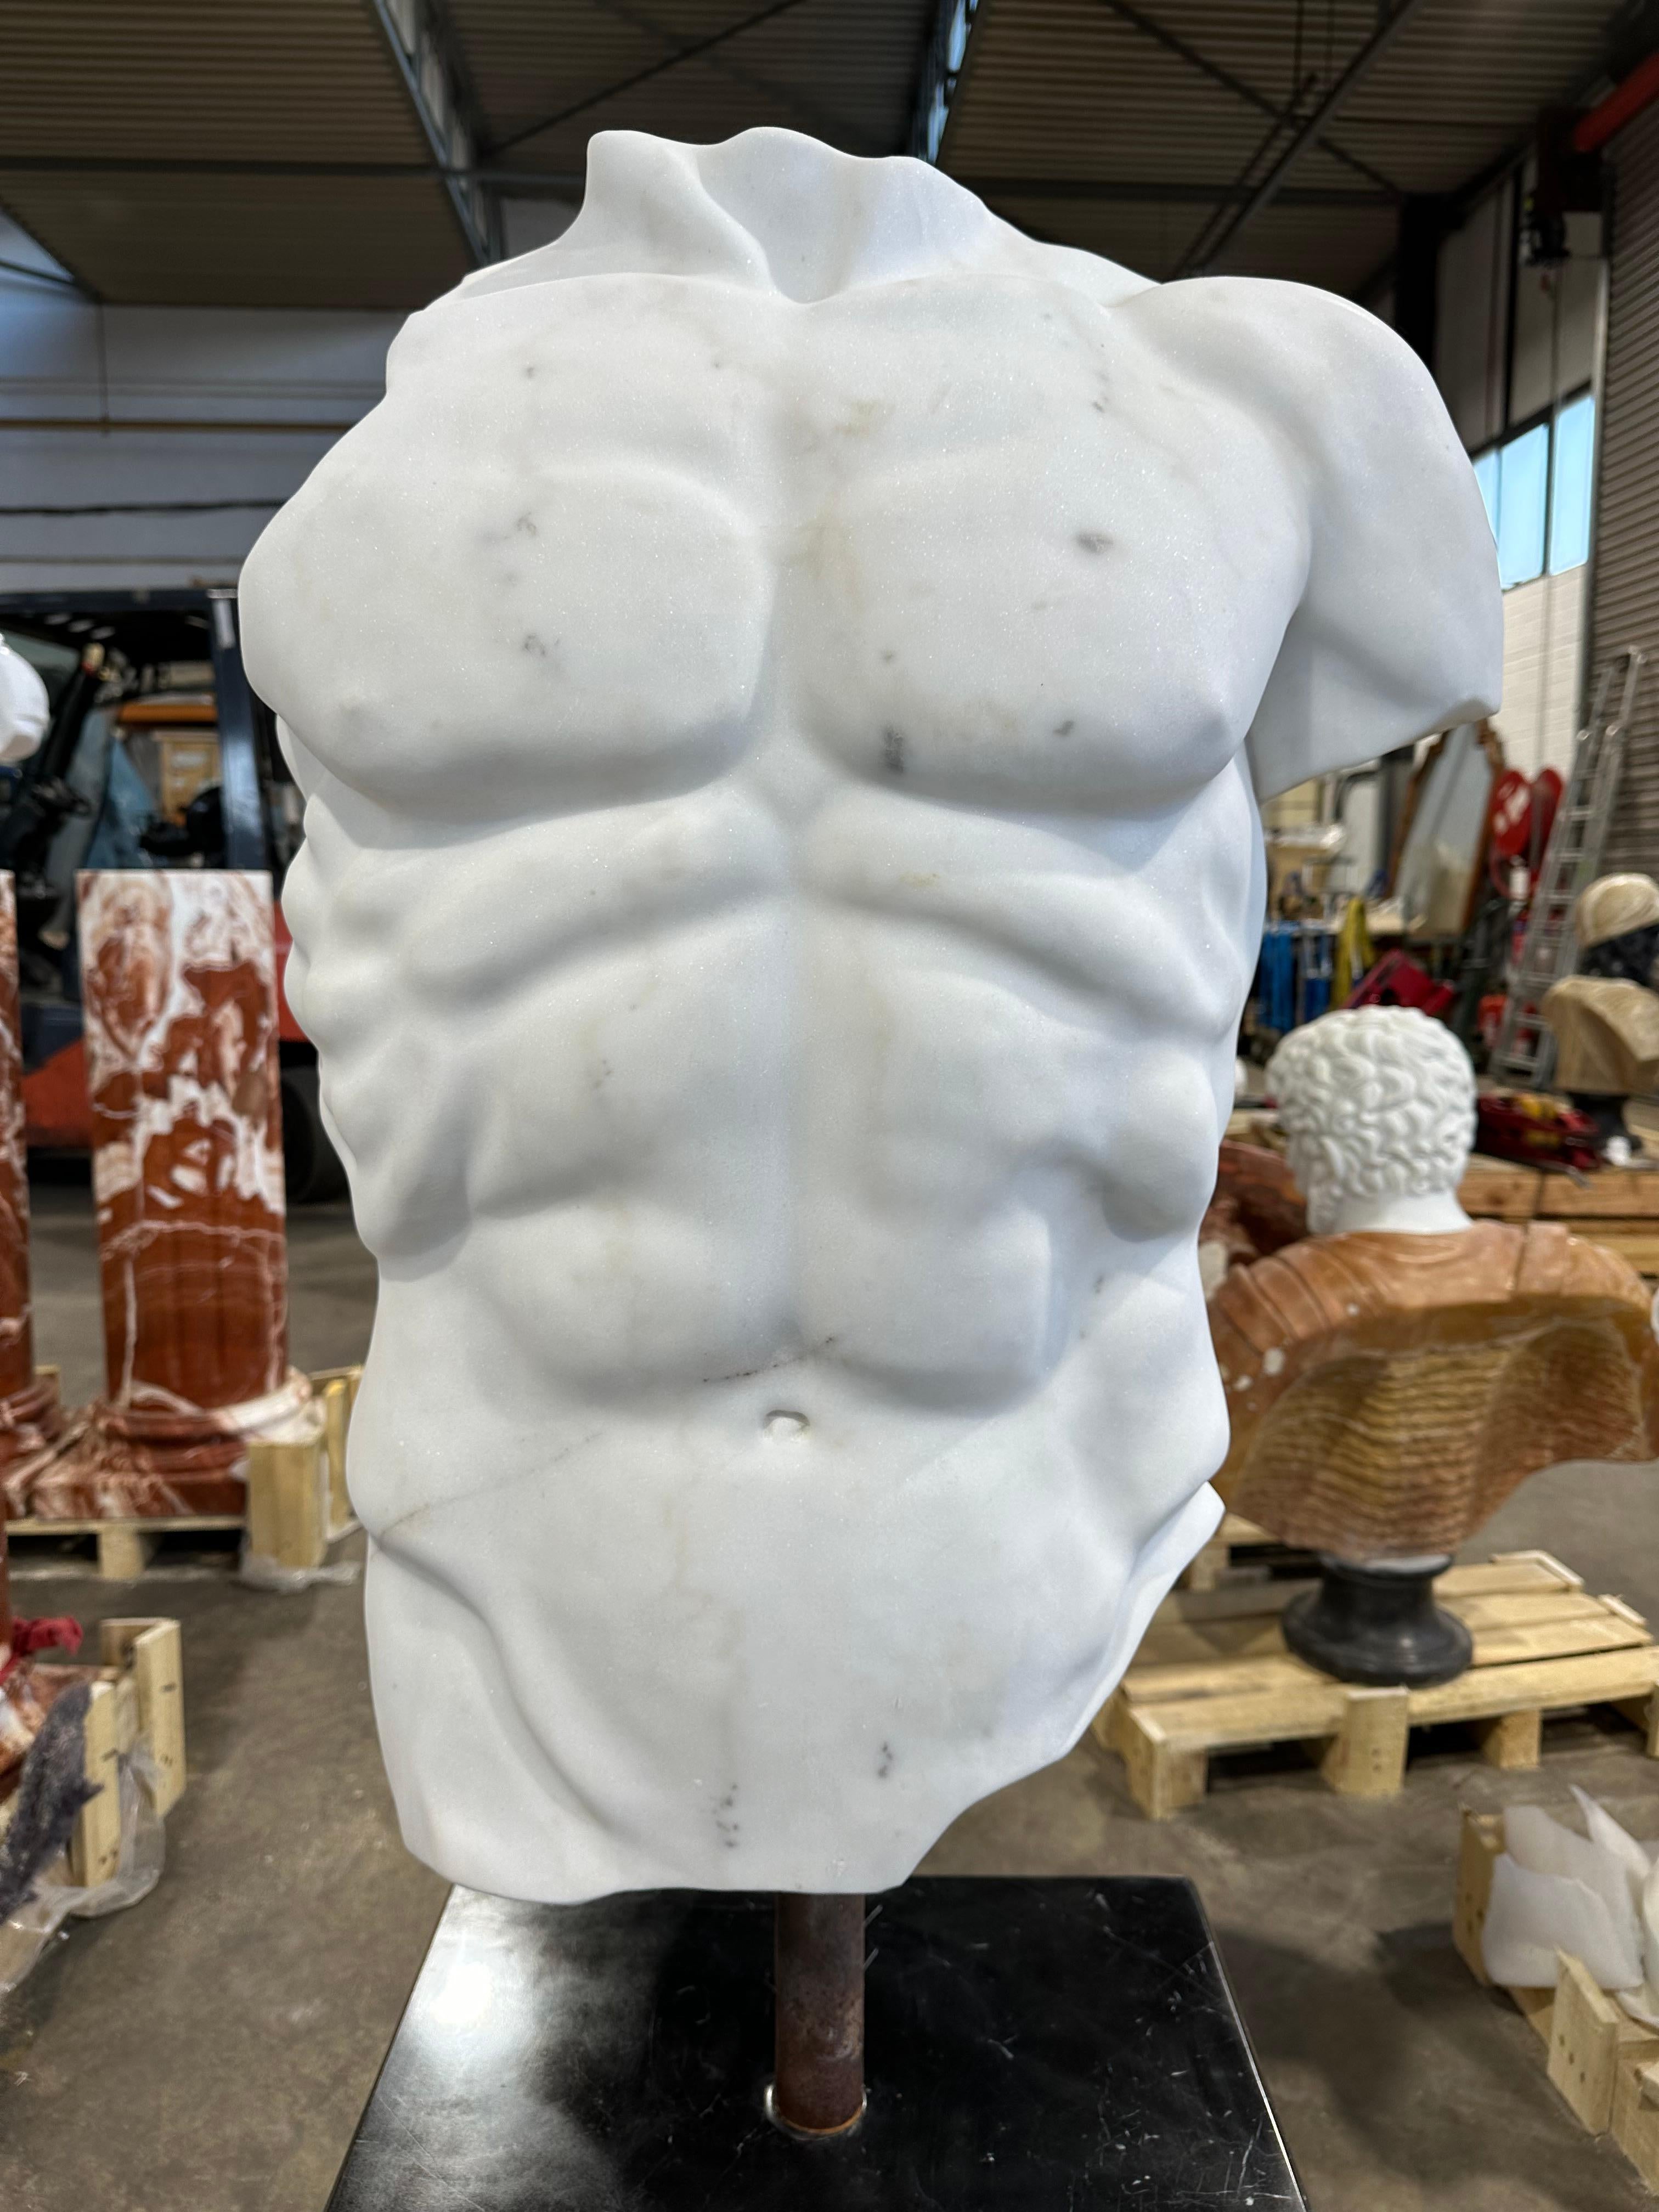 A skilfully carved and detailed Greek Style Male torso in white marble on a black marble stand. The contours of the muscles are defined, the marble smooth. A striking bust that would make a lovely centrepiece.